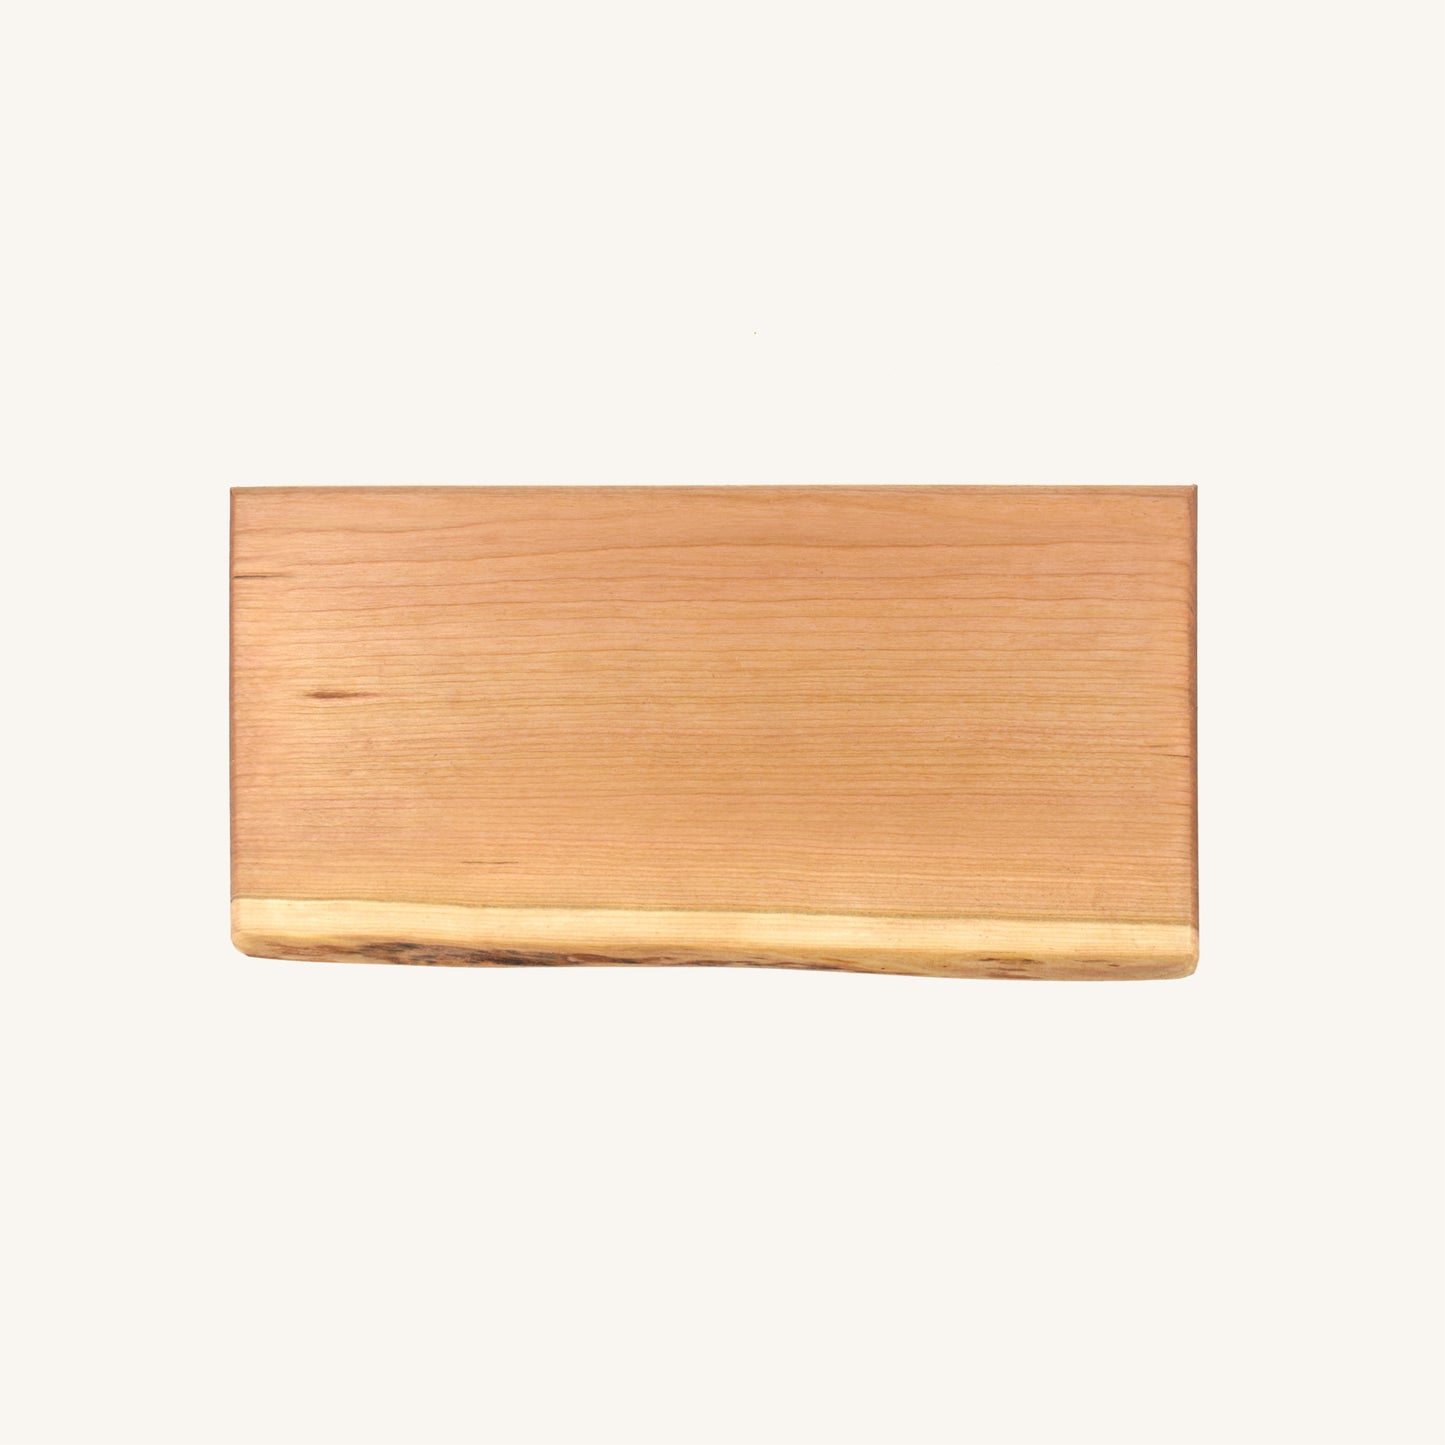 Small Live Edge Cherry Wood Serving Tray